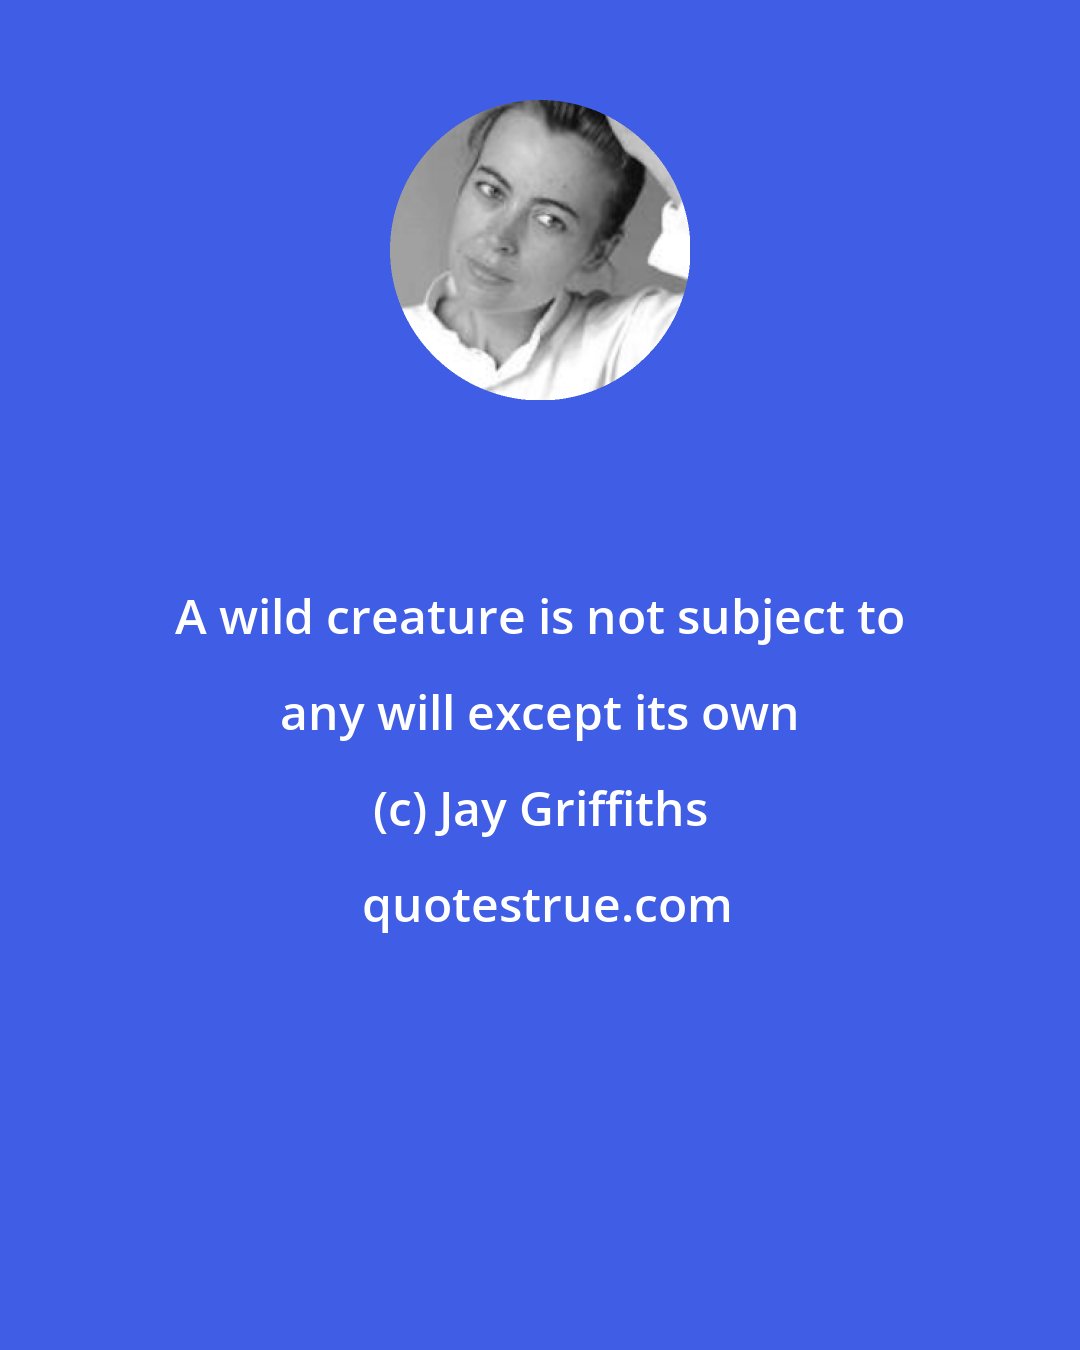 Jay Griffiths: A wild creature is not subject to any will except its own